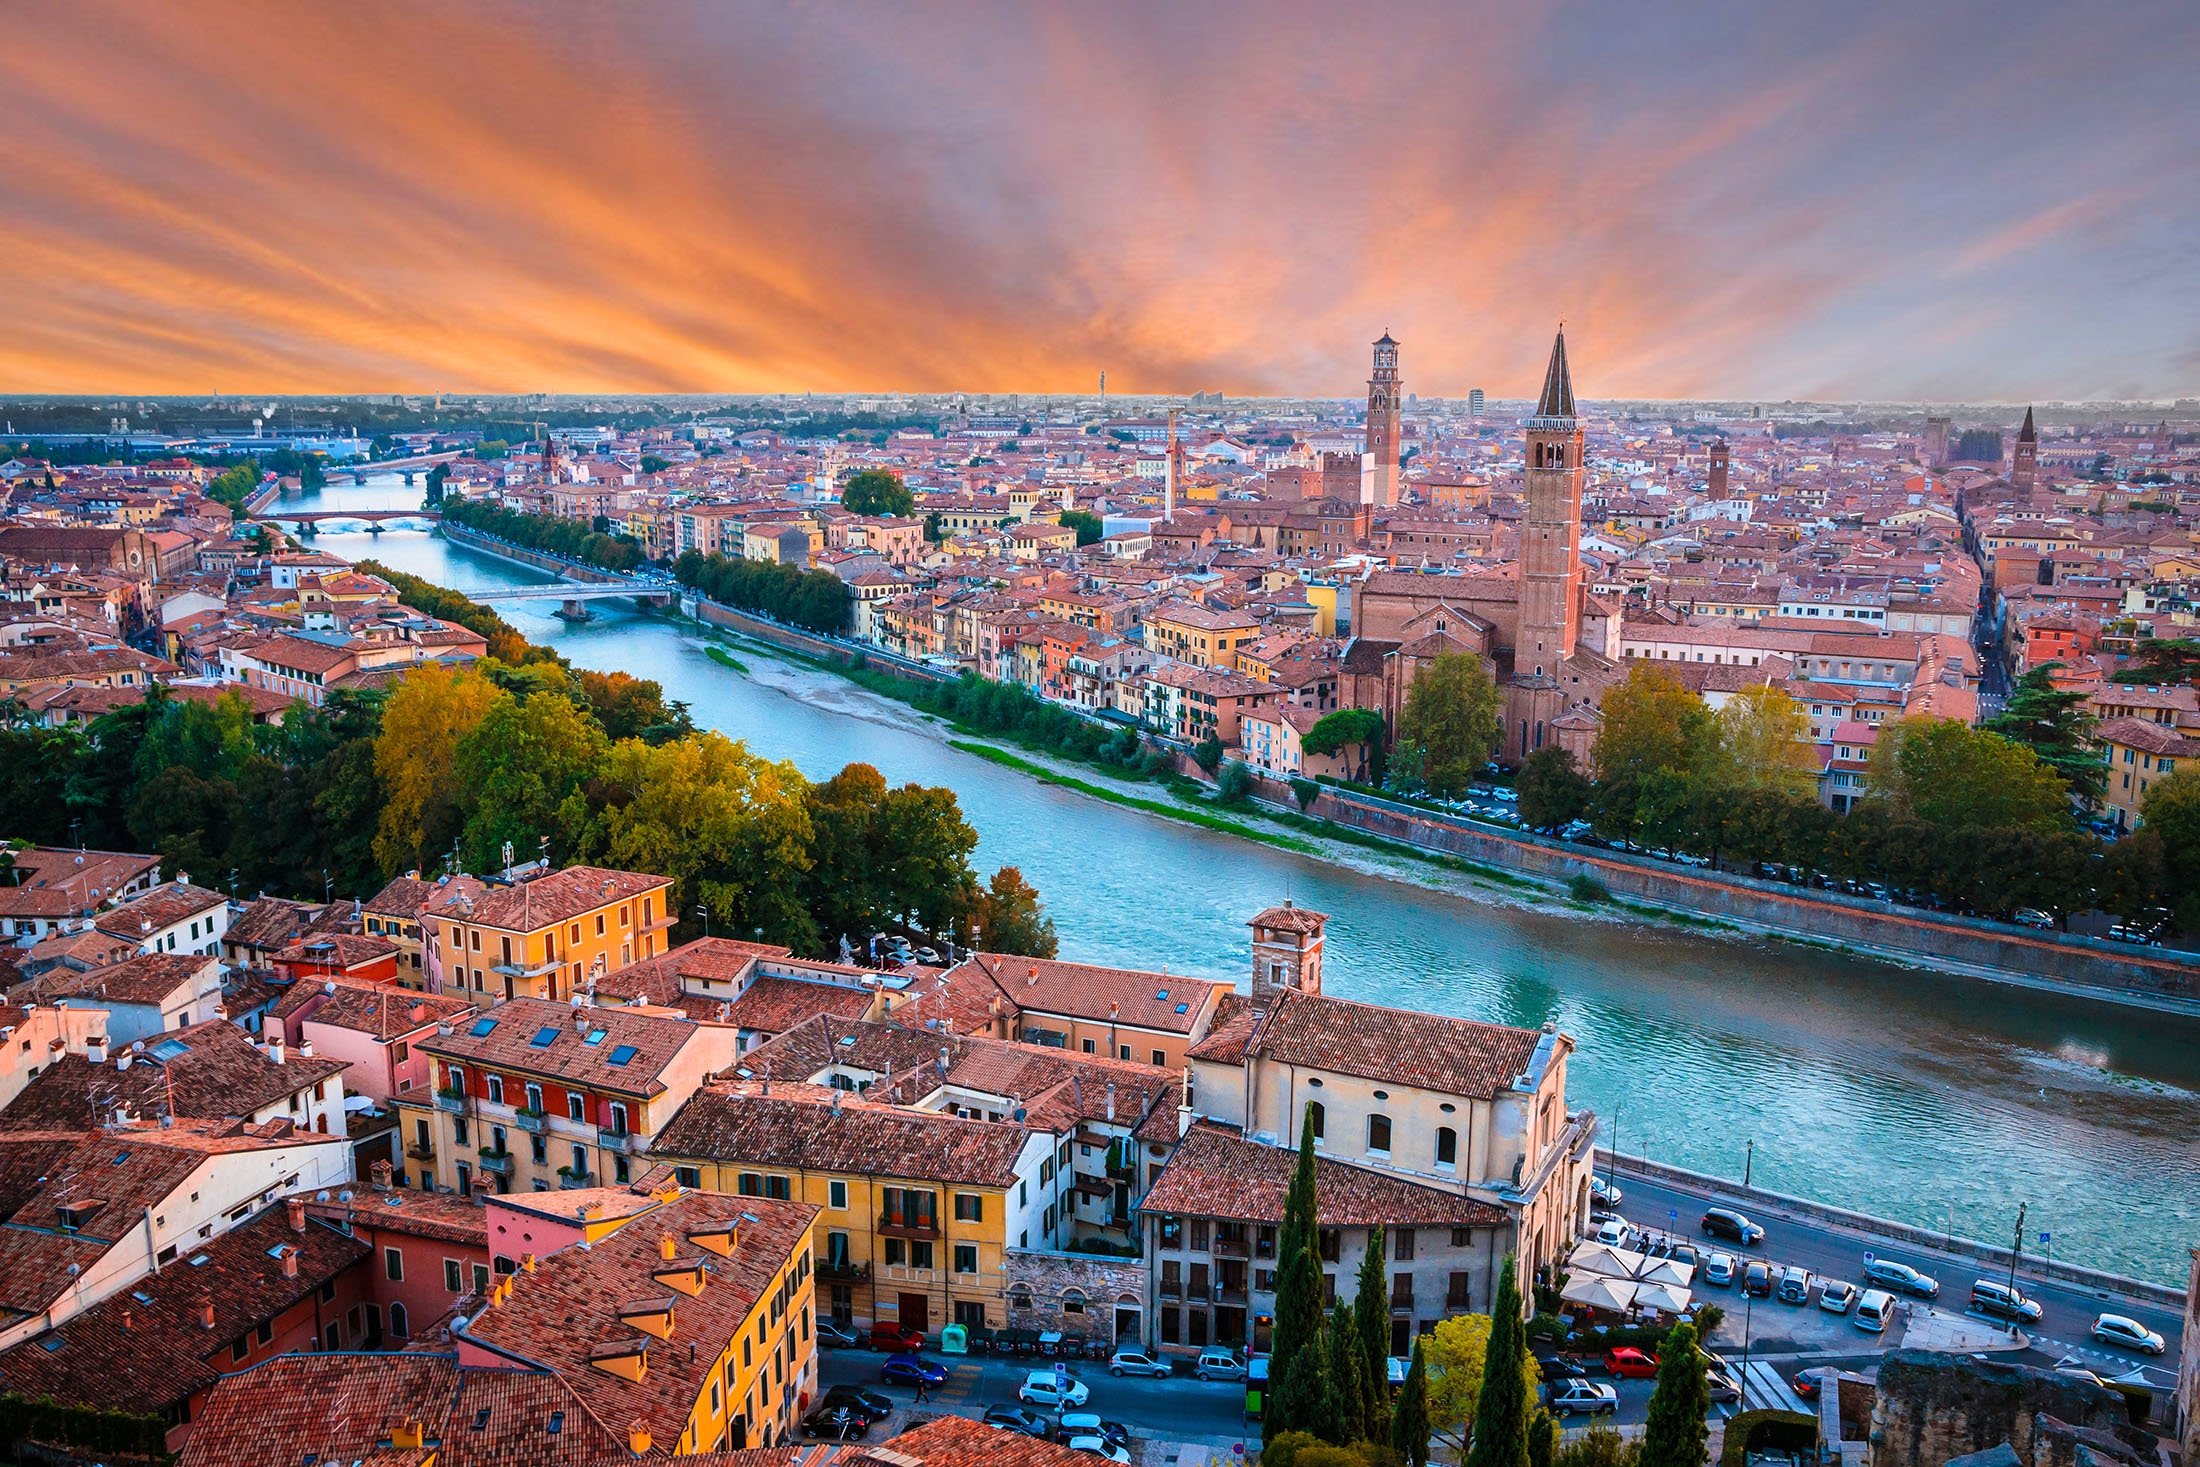 Things To Do In VERONA, Italy - TOP 12 (incl. Romeo&Juliet) 